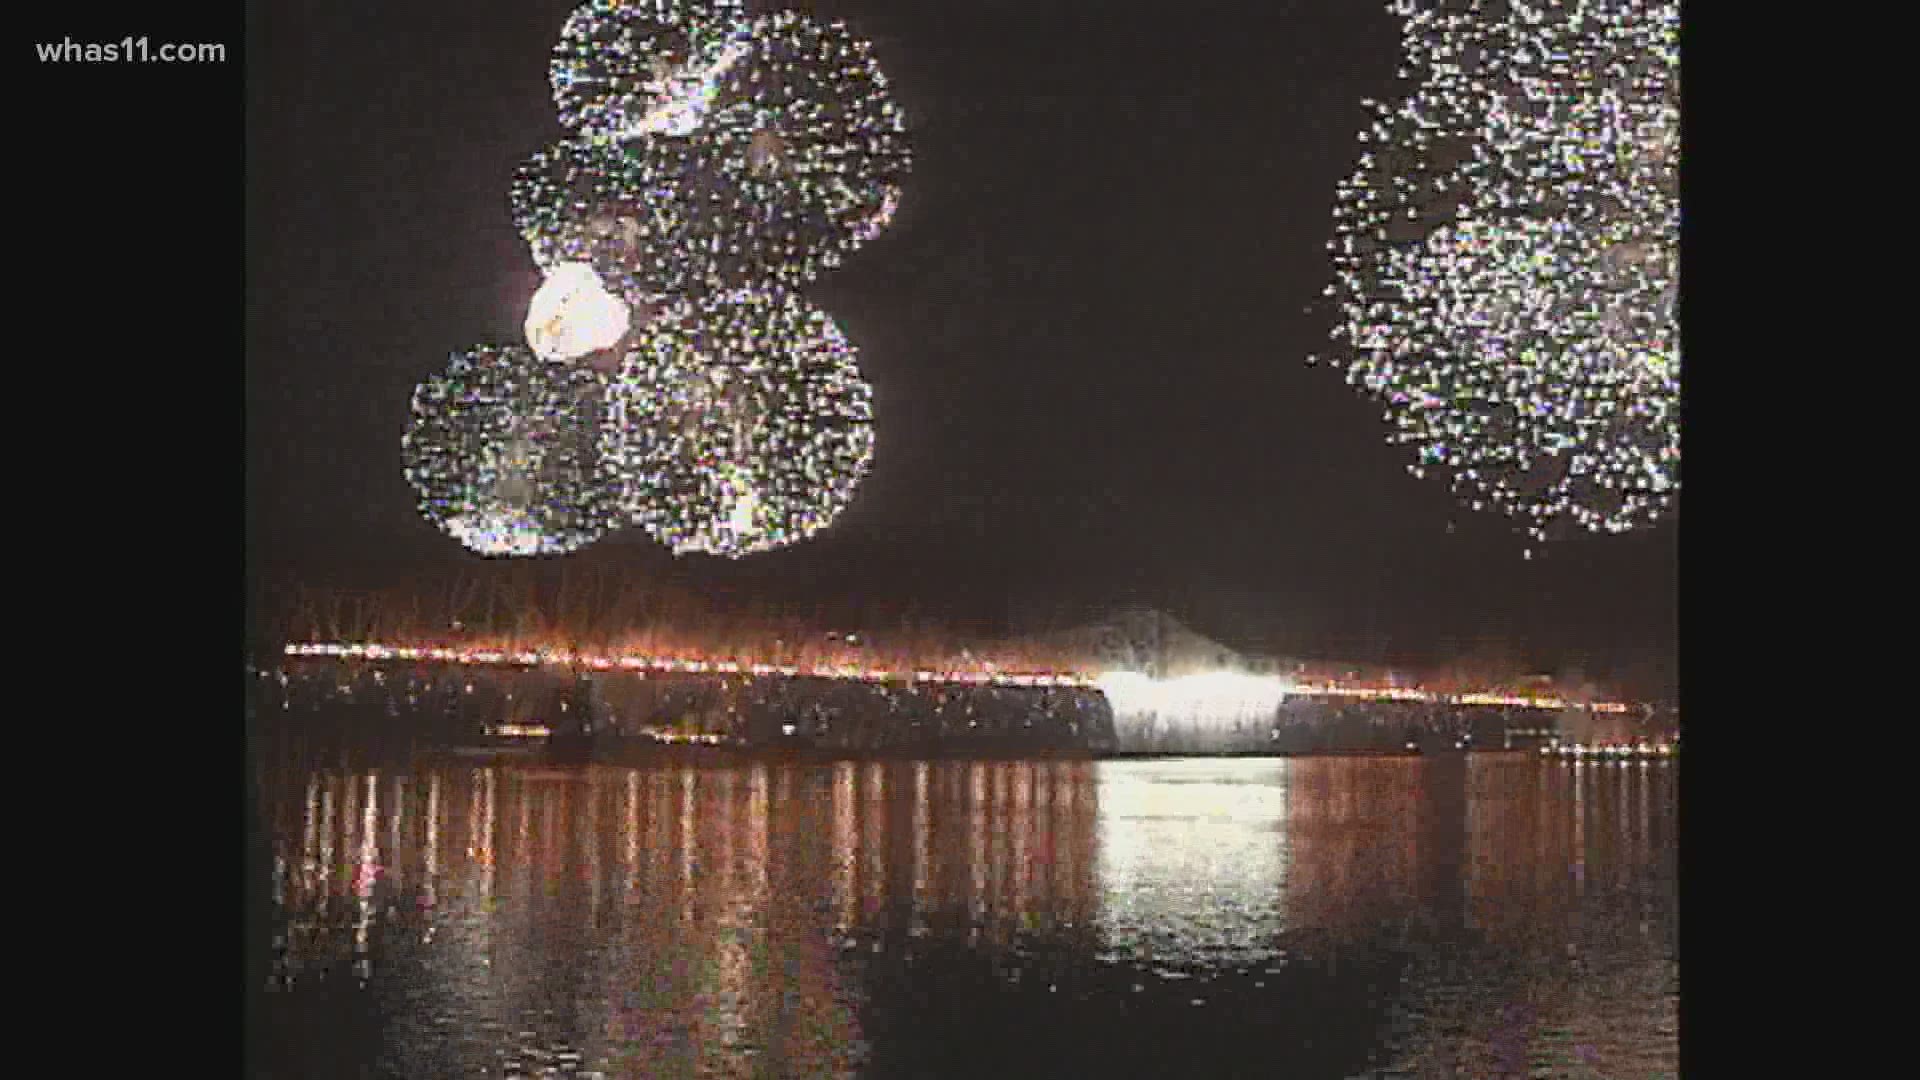 We're taking a look back at the spark that led to the first Thunder Over Louisville and some of the event's memorable moments.